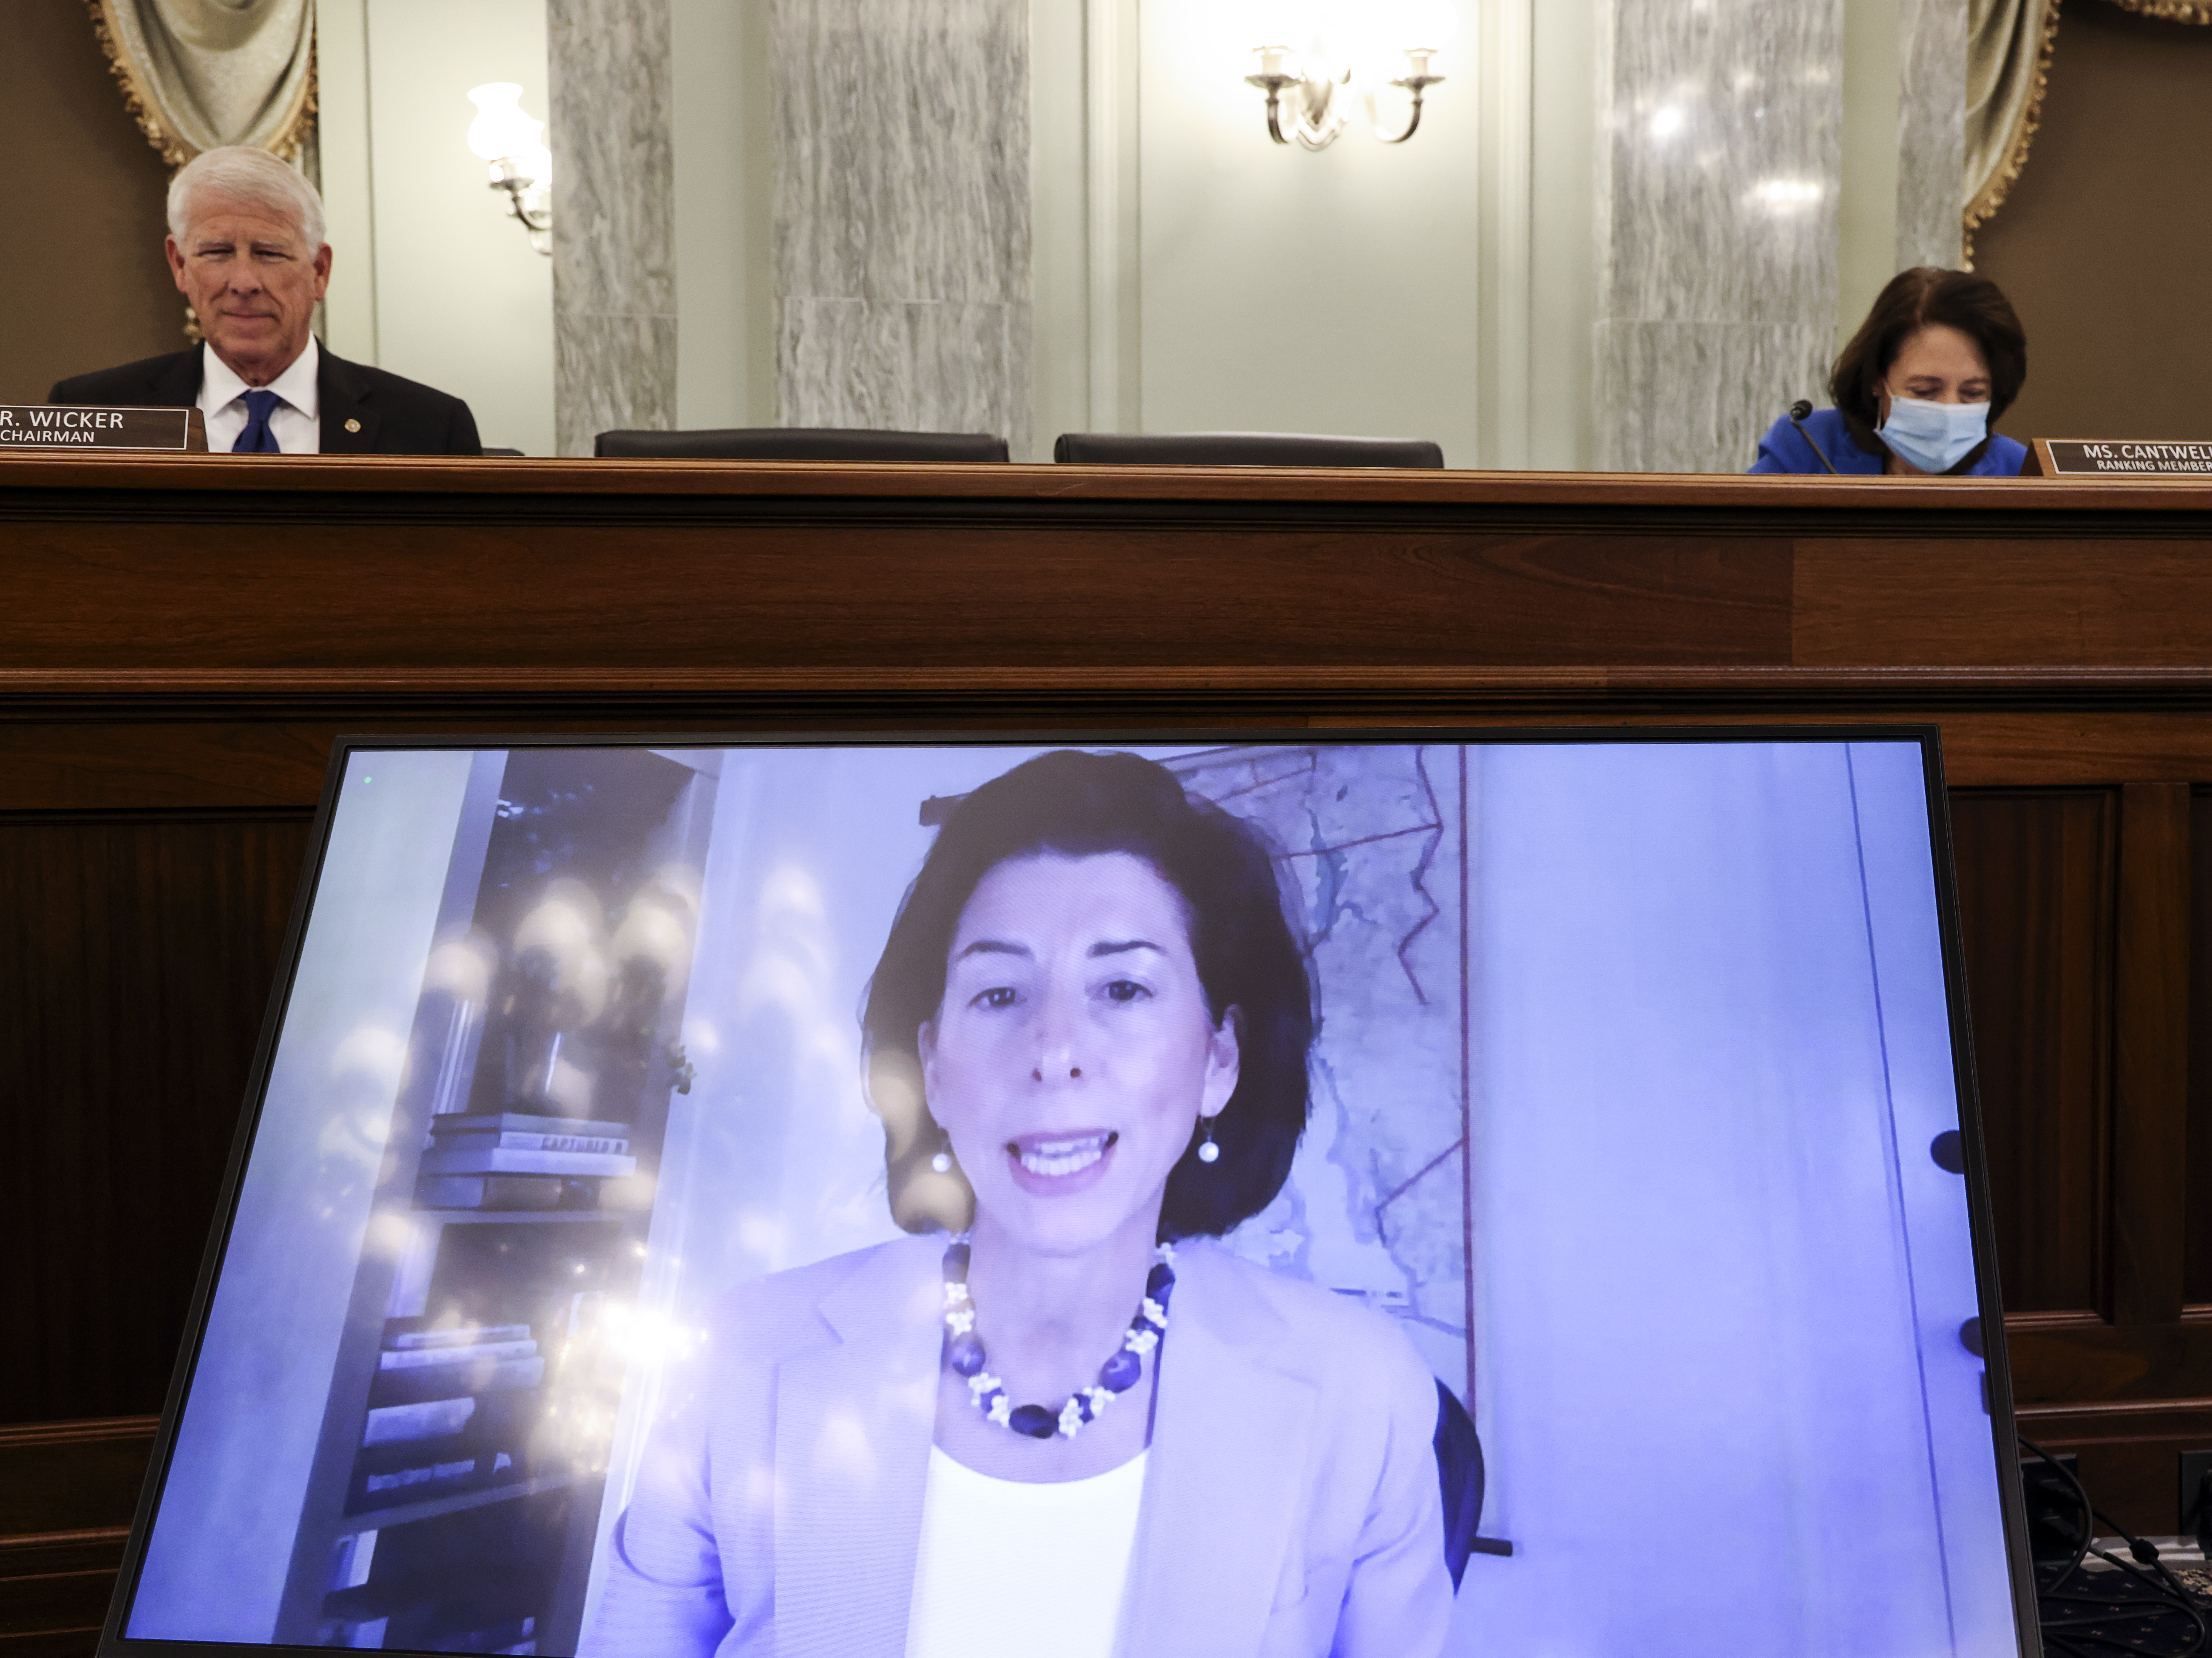 Rhode Island Gov. Gina Raimondo appears through video conferencing Tuesday during a Senate hearing for her nomination as the secretary for the Commerce Department, which oversees the U.S. Census Bureau. Jonathan Ernst/Bloomberg via Getty Images